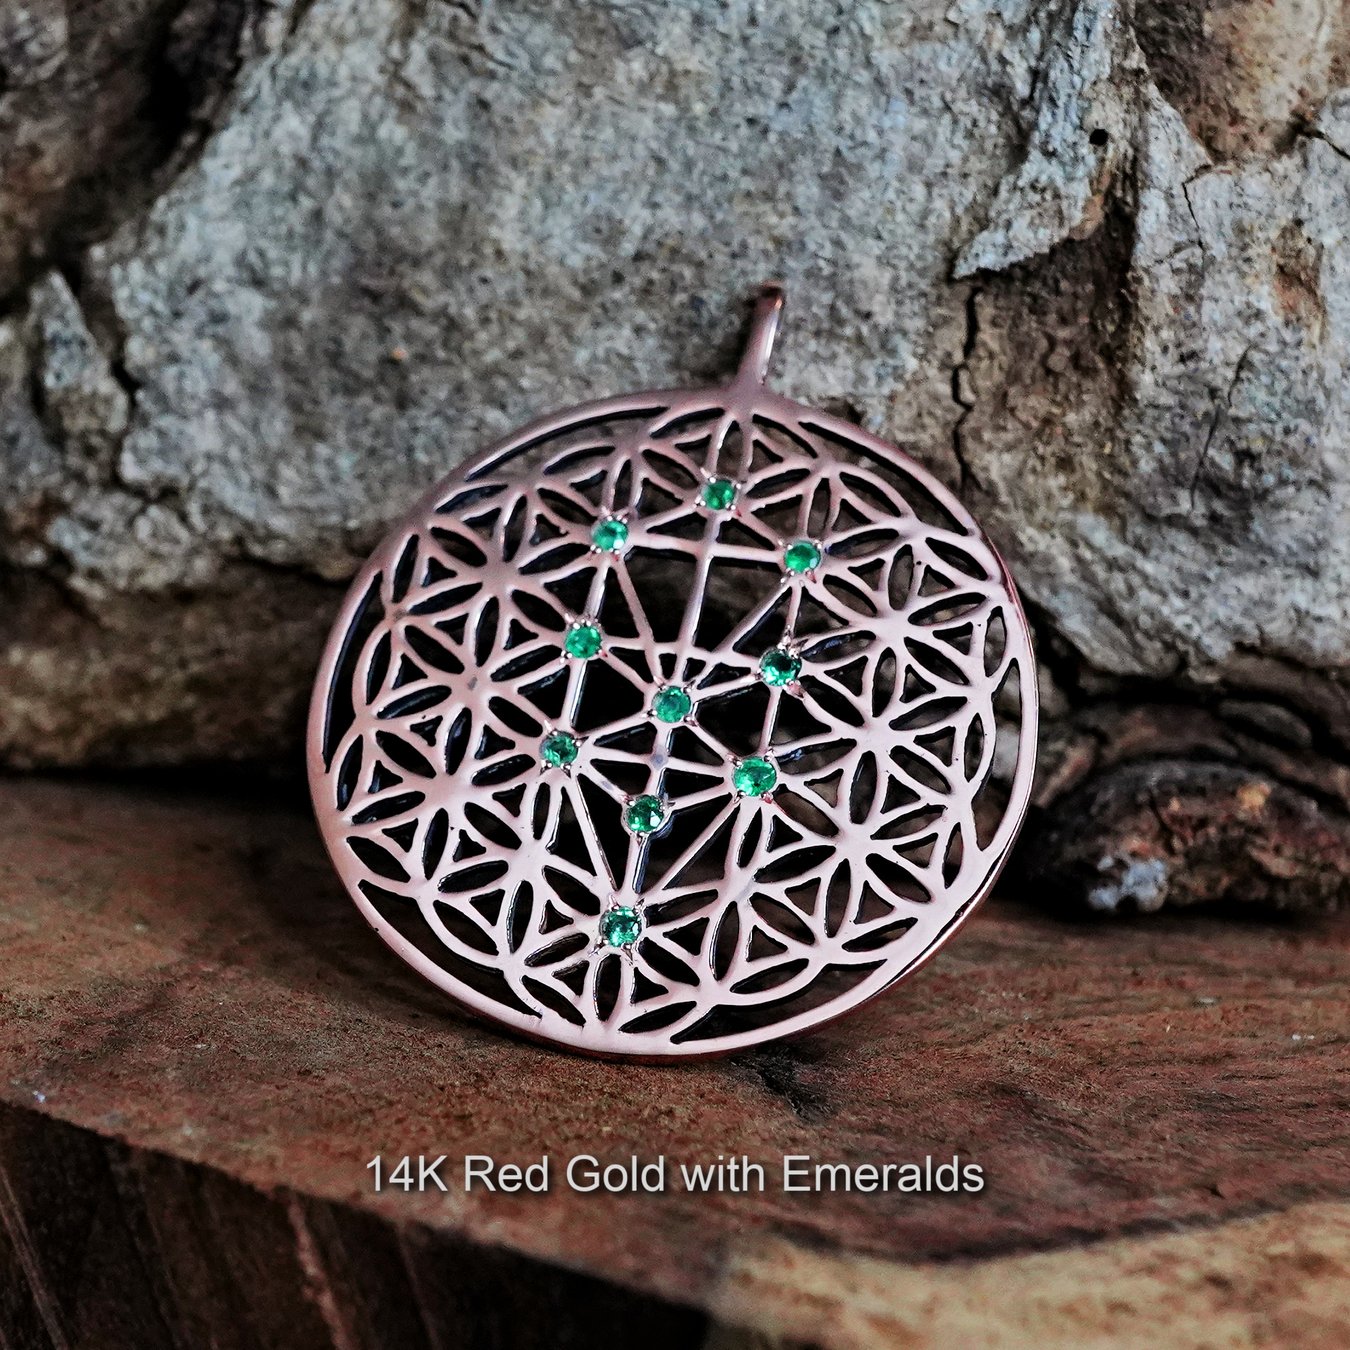 A 14K Red Gold Inlaid Flower of Life Tree of Life Pendant